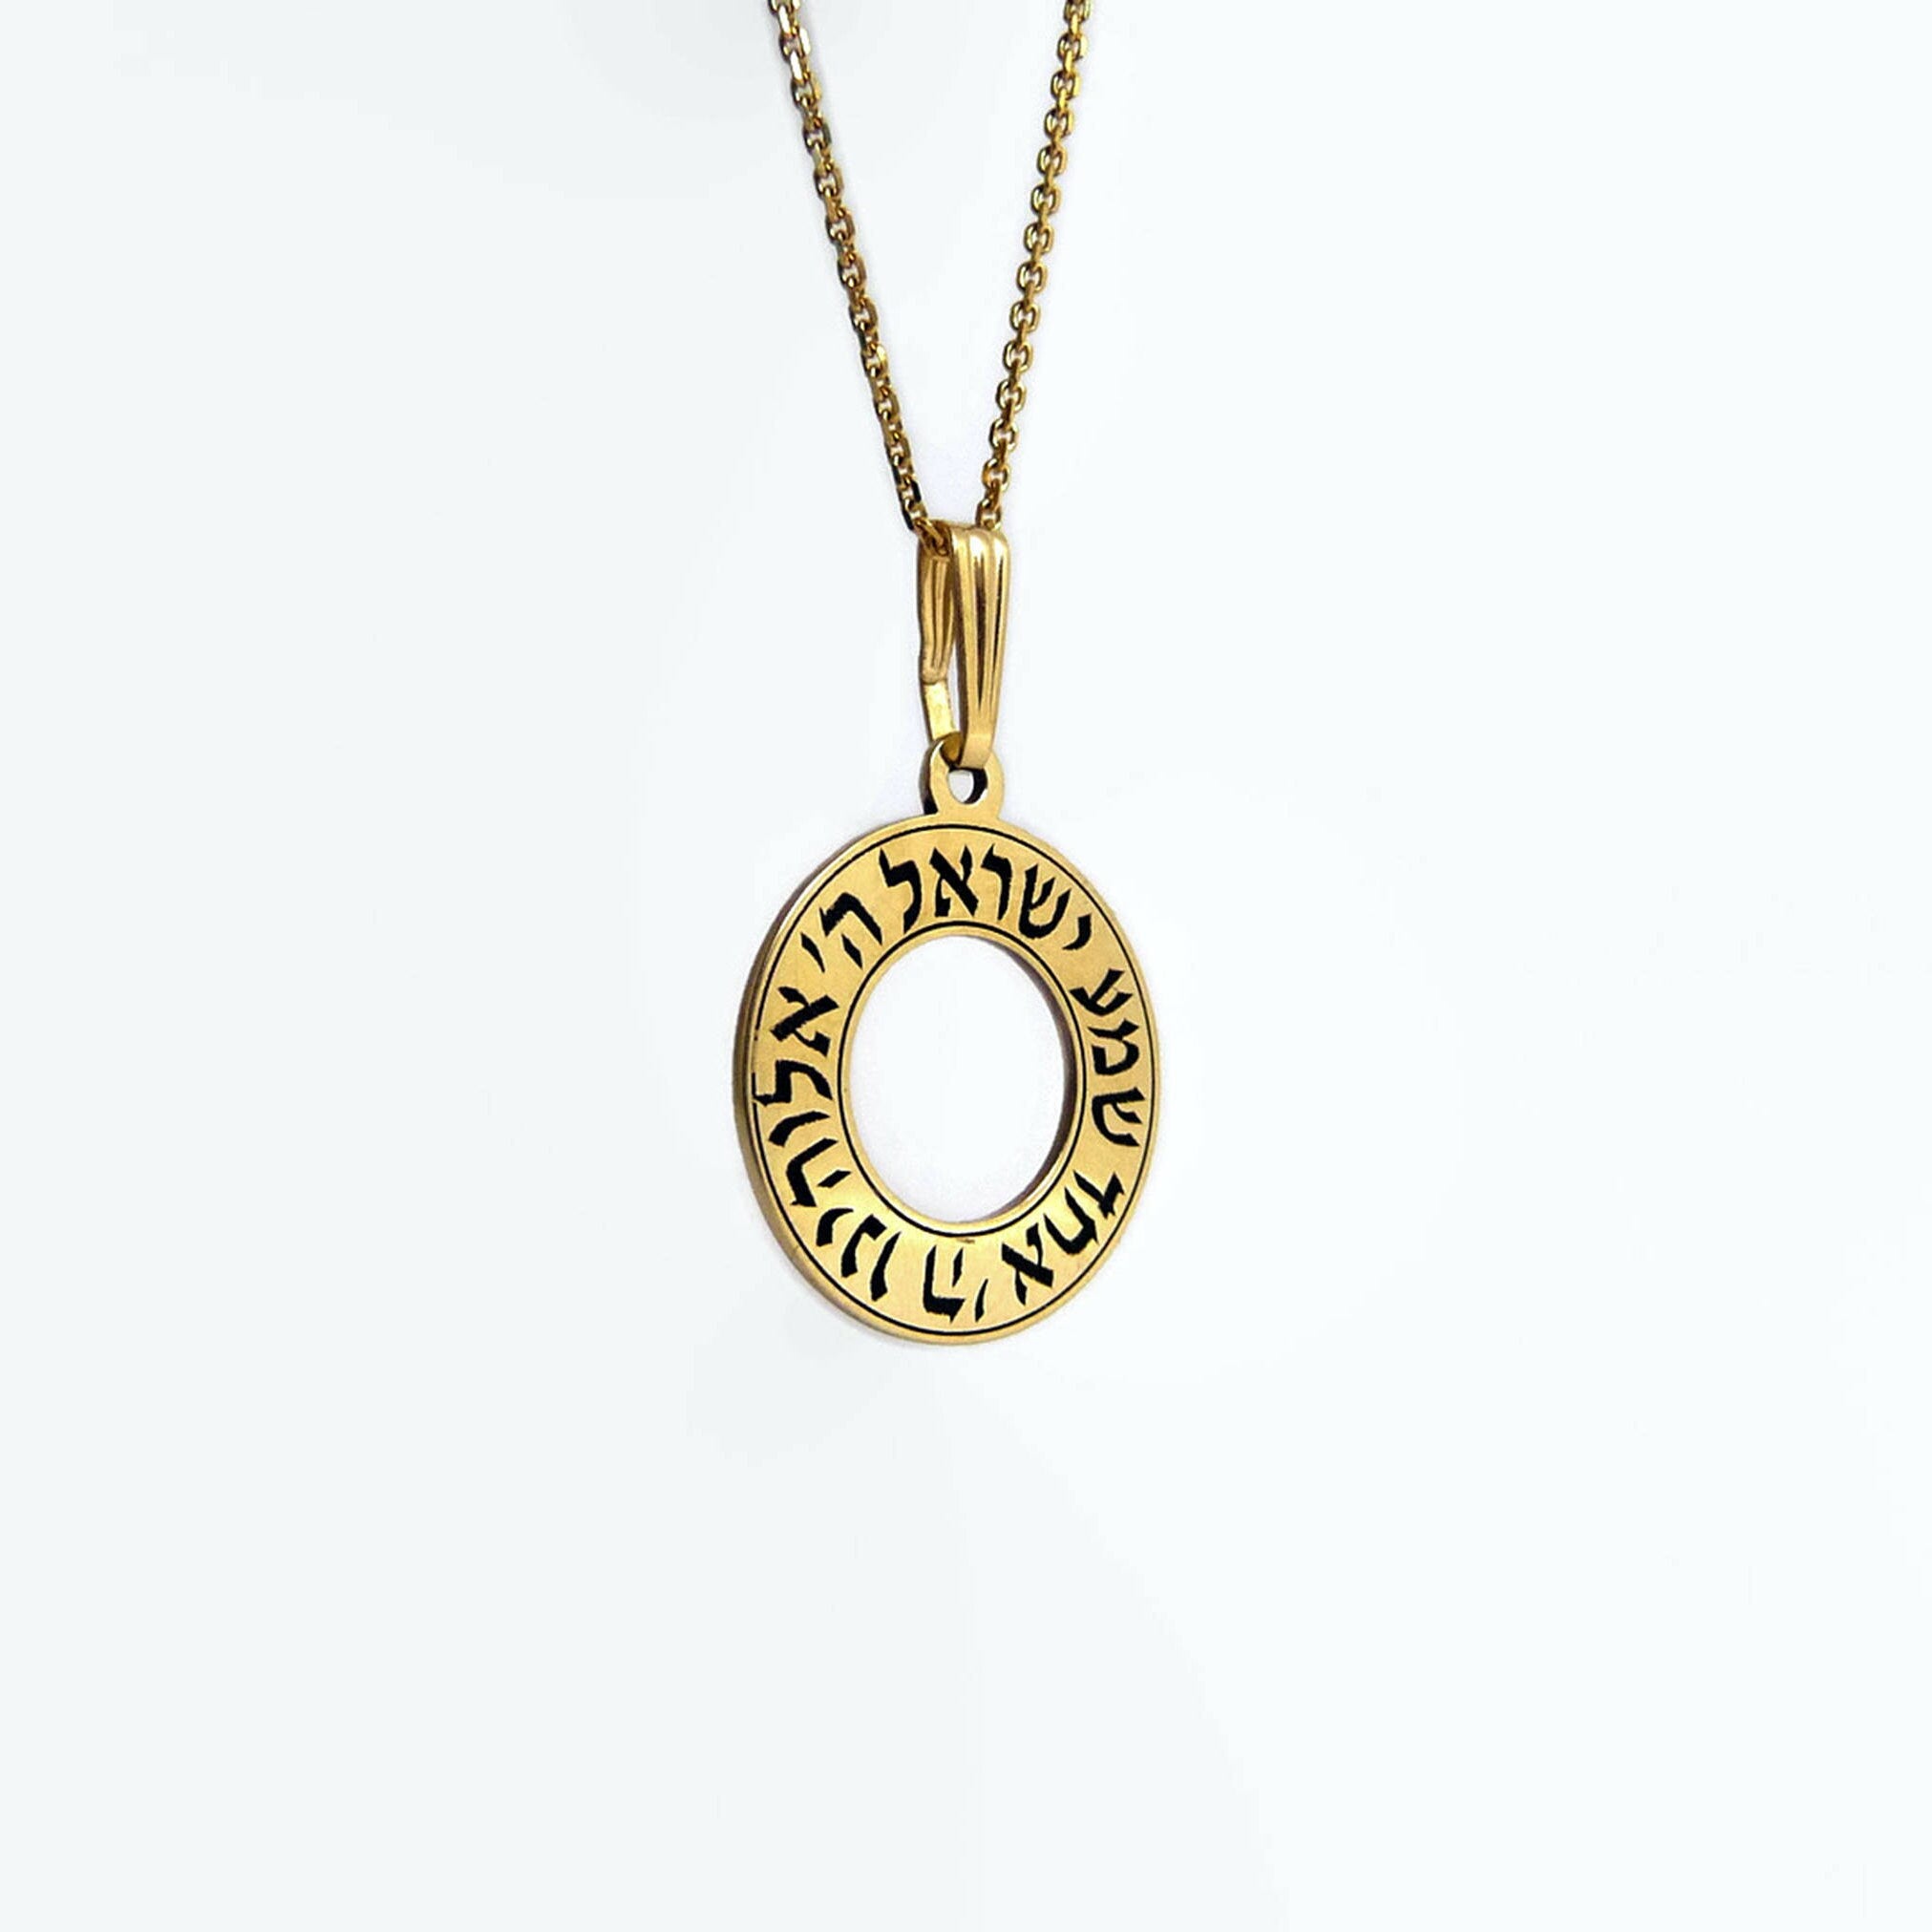 60th Birthday Gift for Her: Shema Israel Pendant in 14k Solid Gold | Personalized Engraved Disc Necklace with Hidden Message